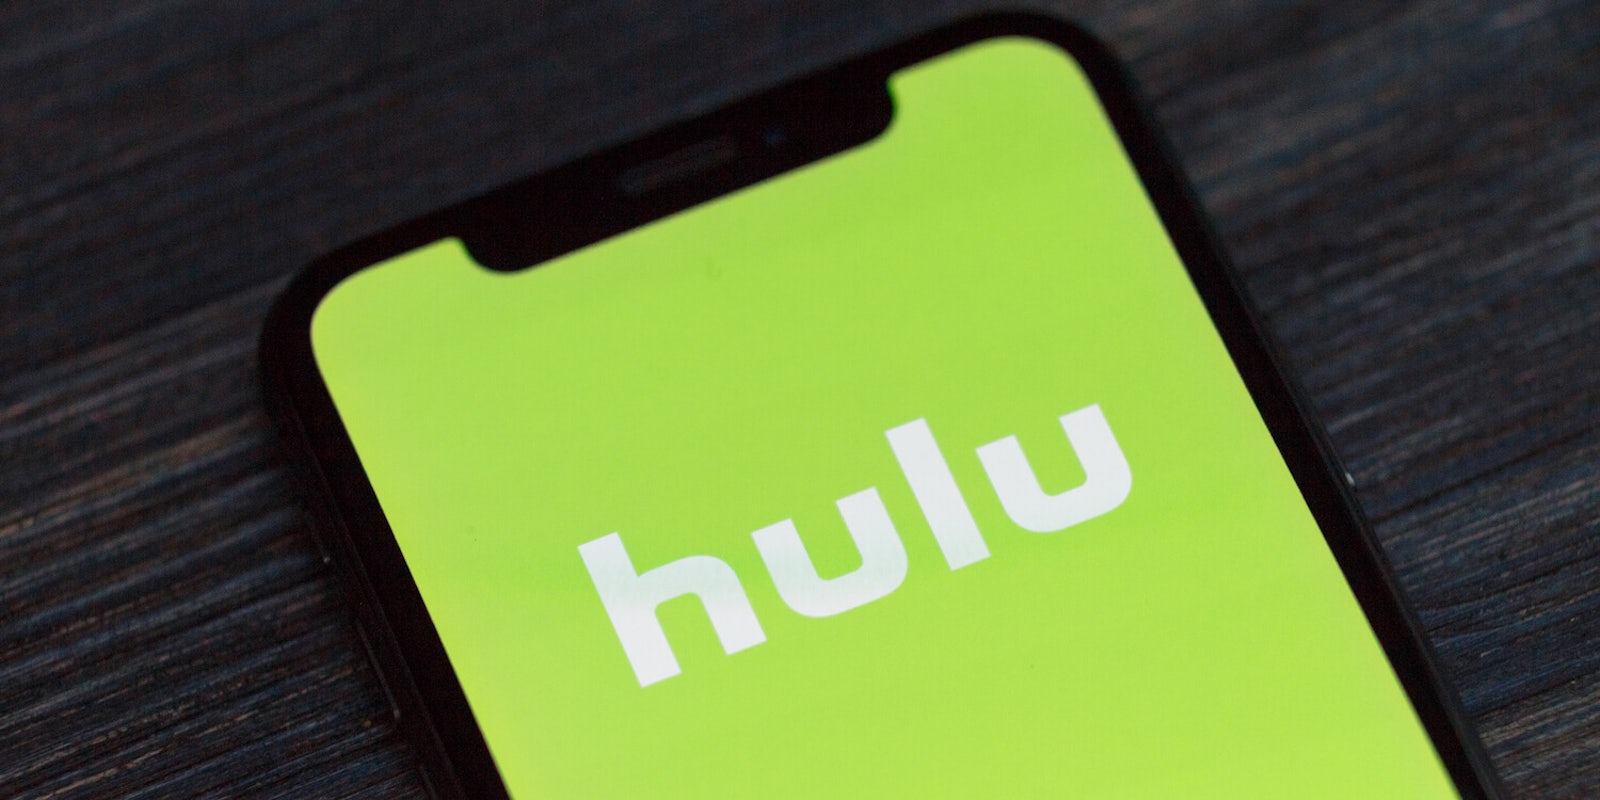 Hulu downloads for mobile offline viewing